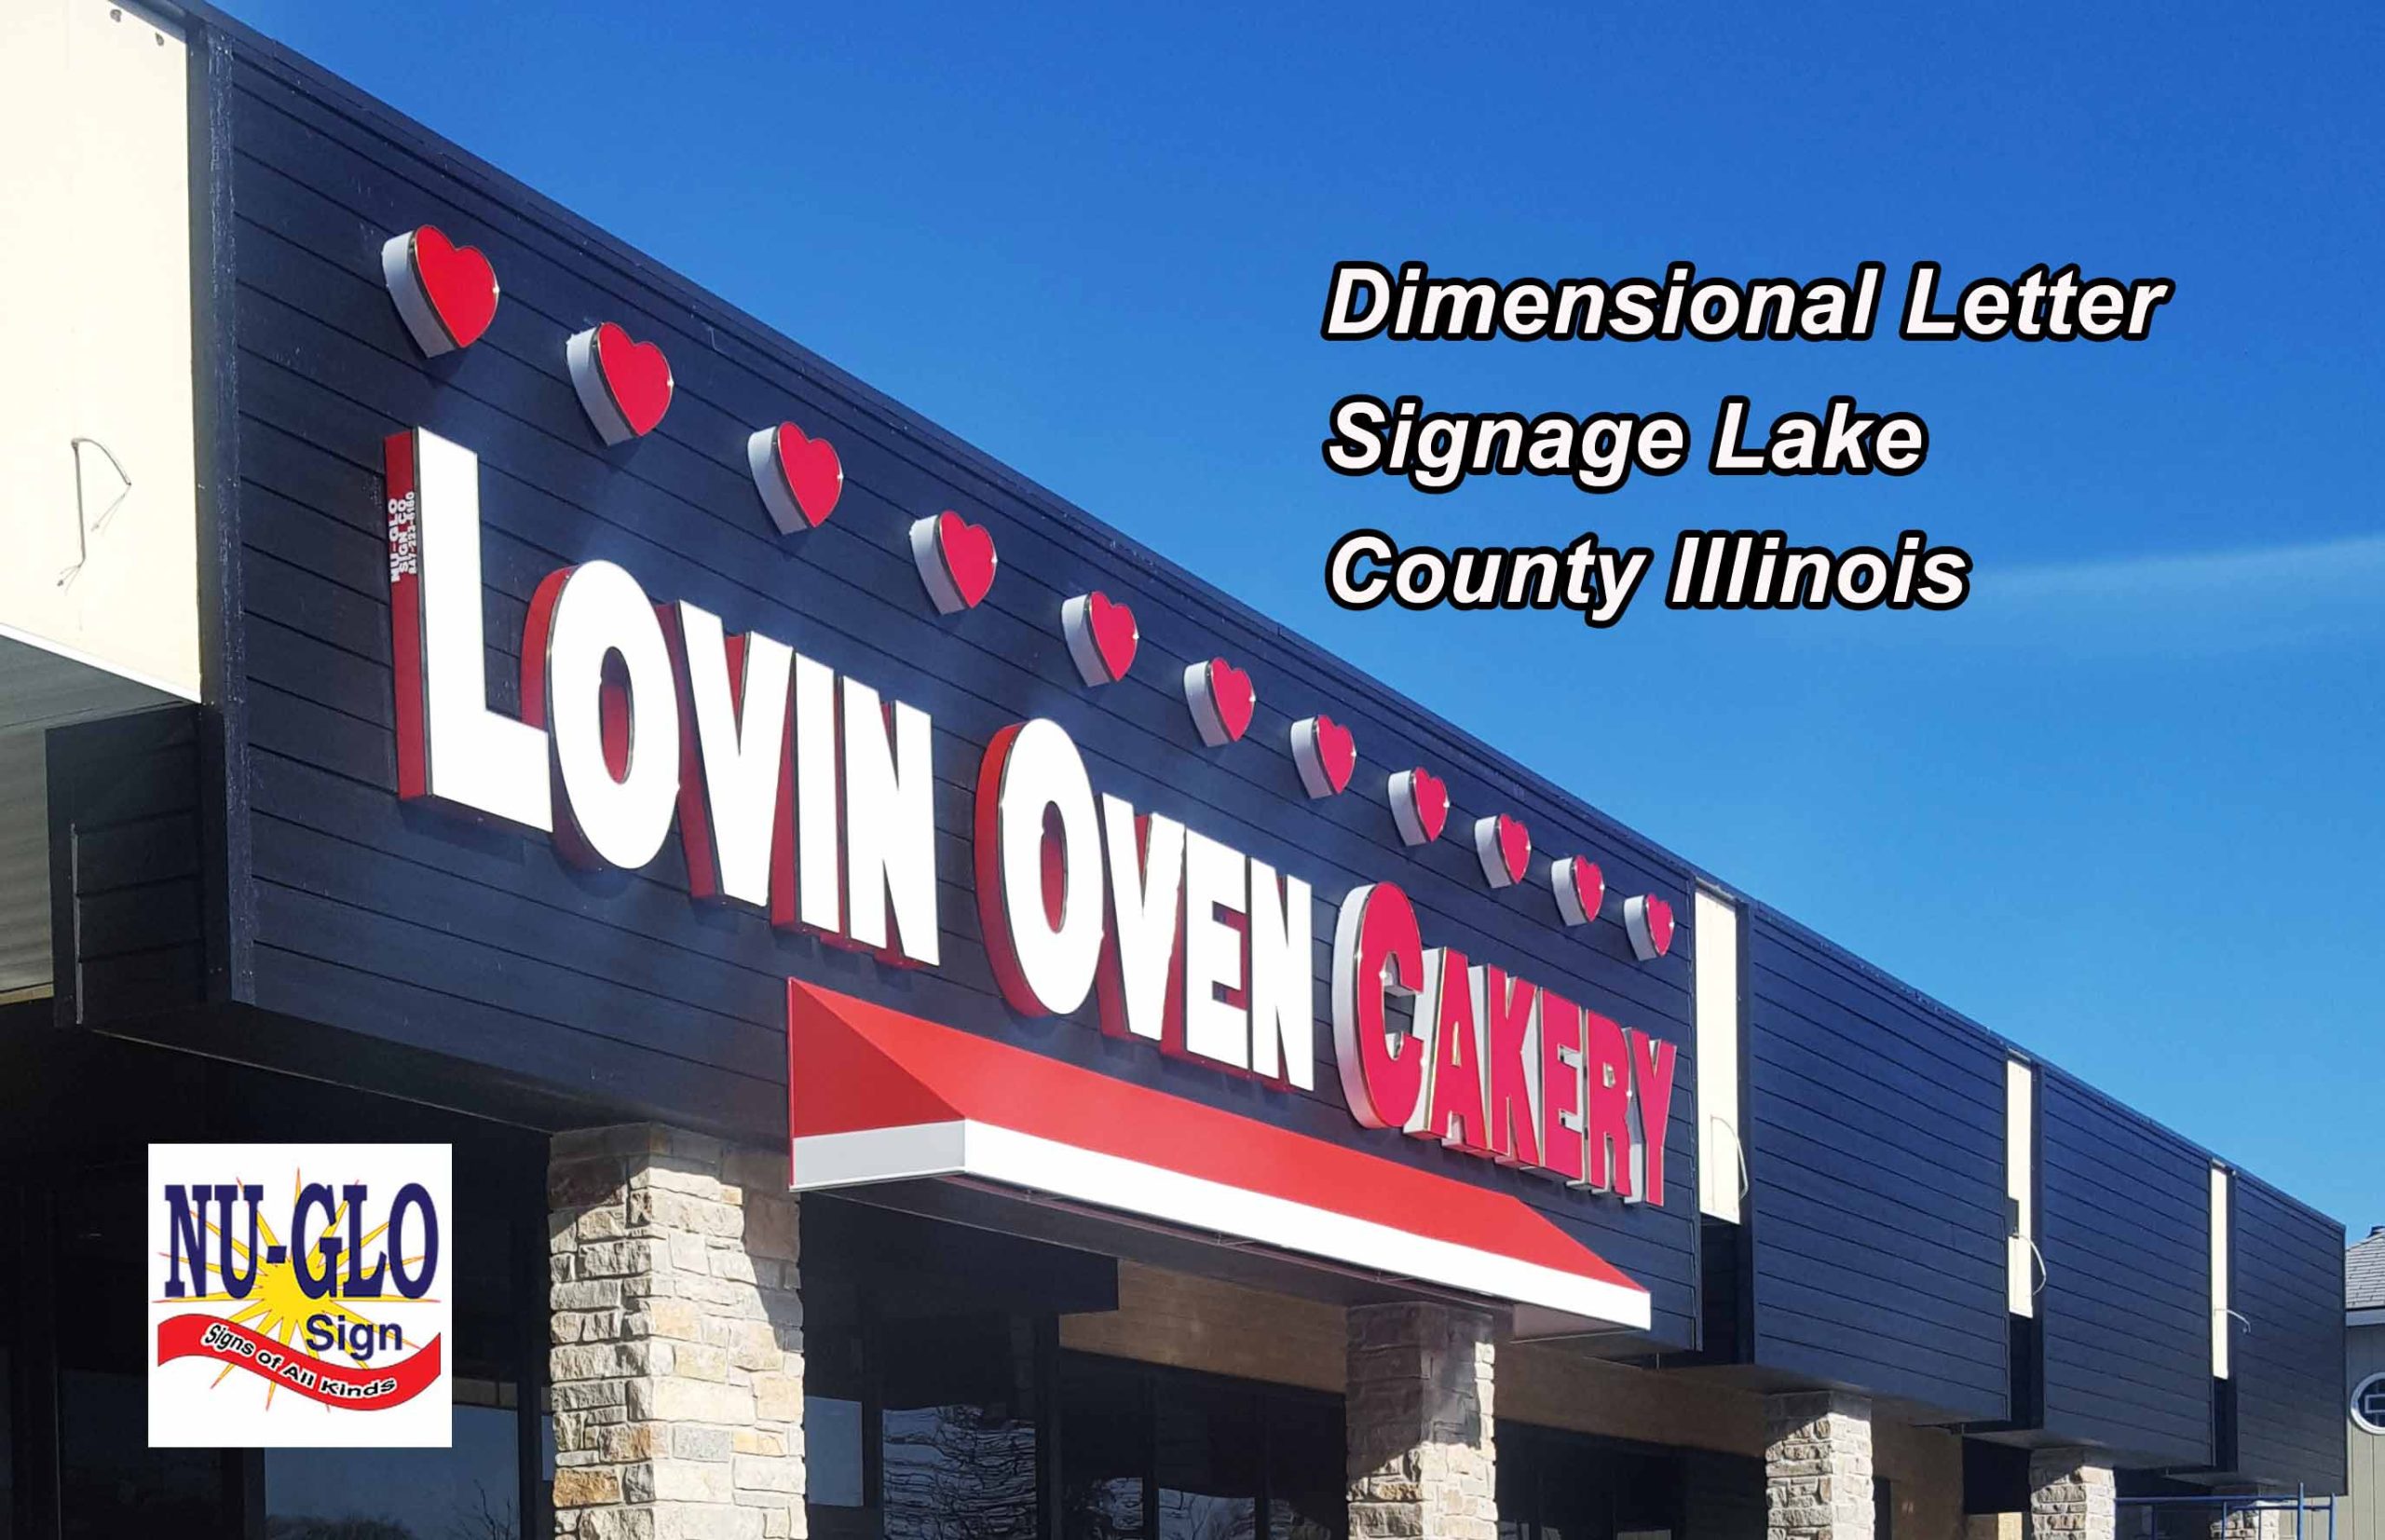 Dimensional Letter Signage Lake County Illinois